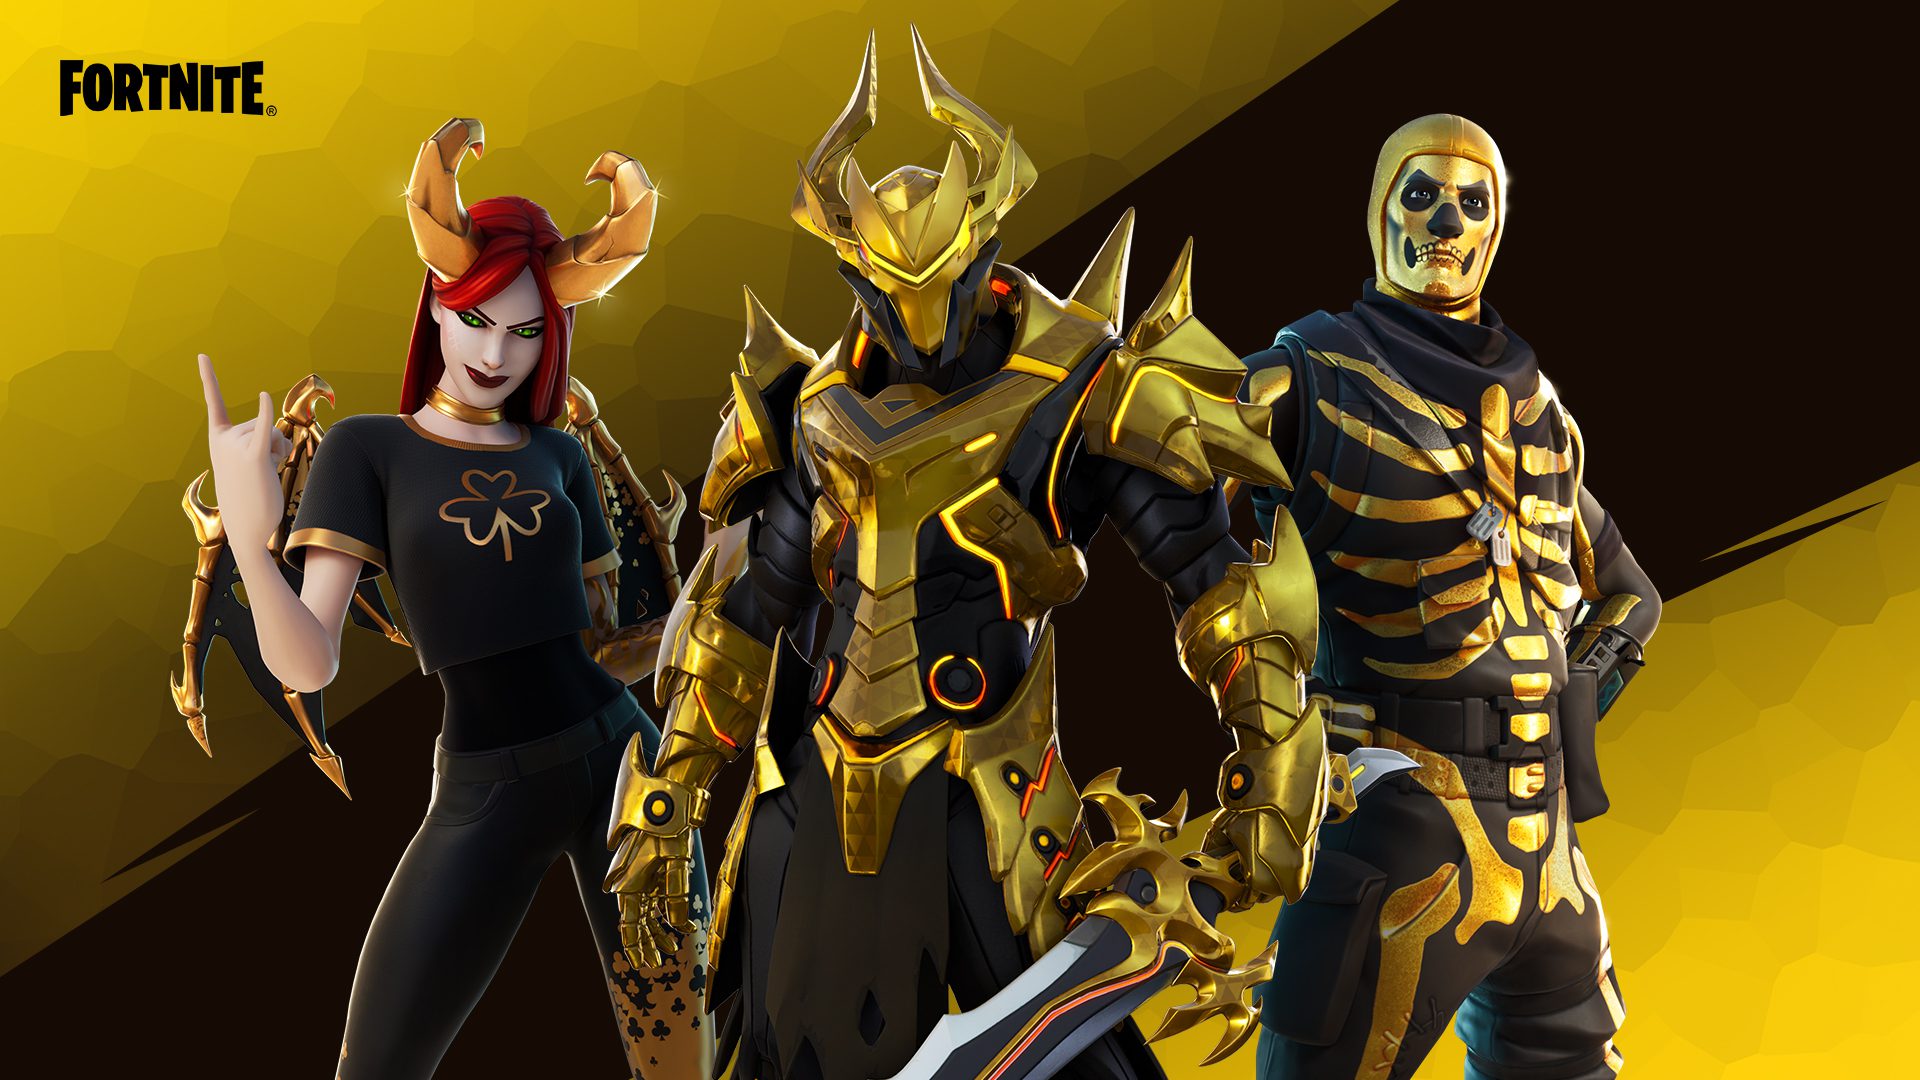 Interview: Leo Faria on Riot's Plans For Wild Rift, Expanding Game  Changers, and More